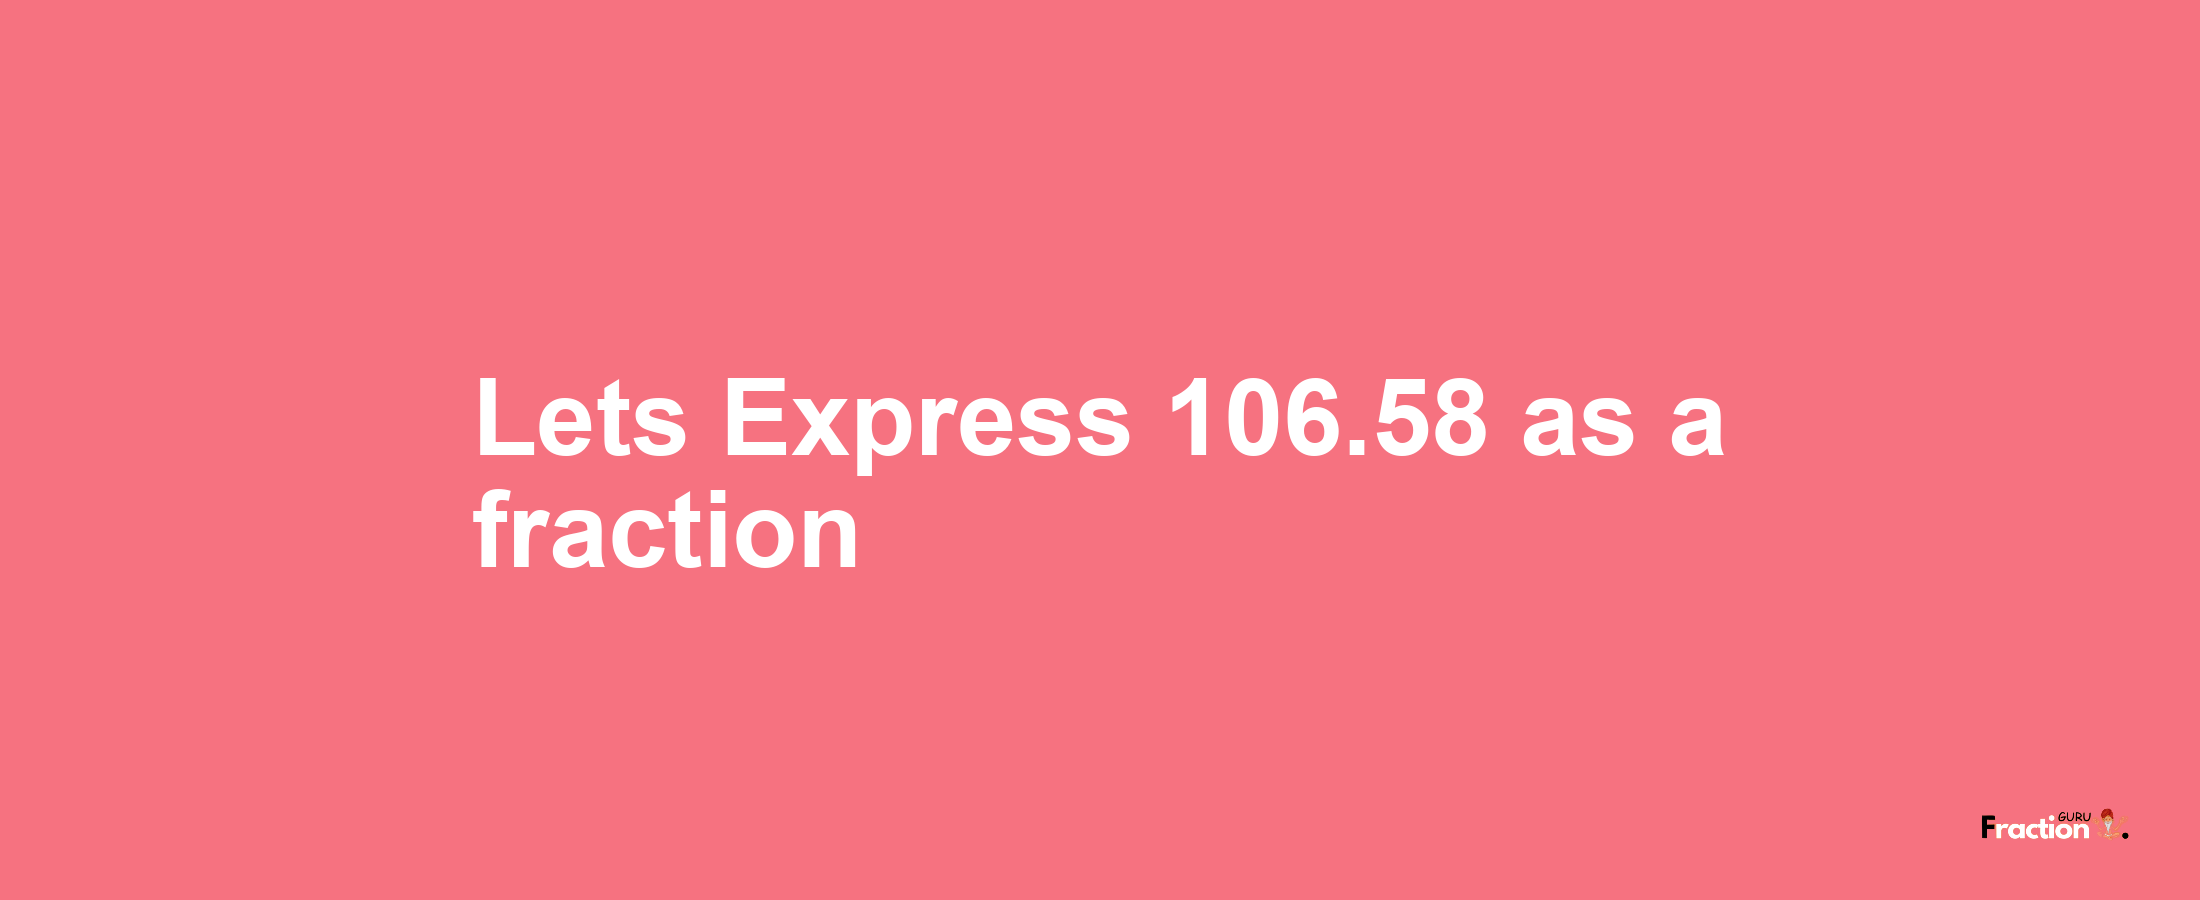 Lets Express 106.58 as afraction